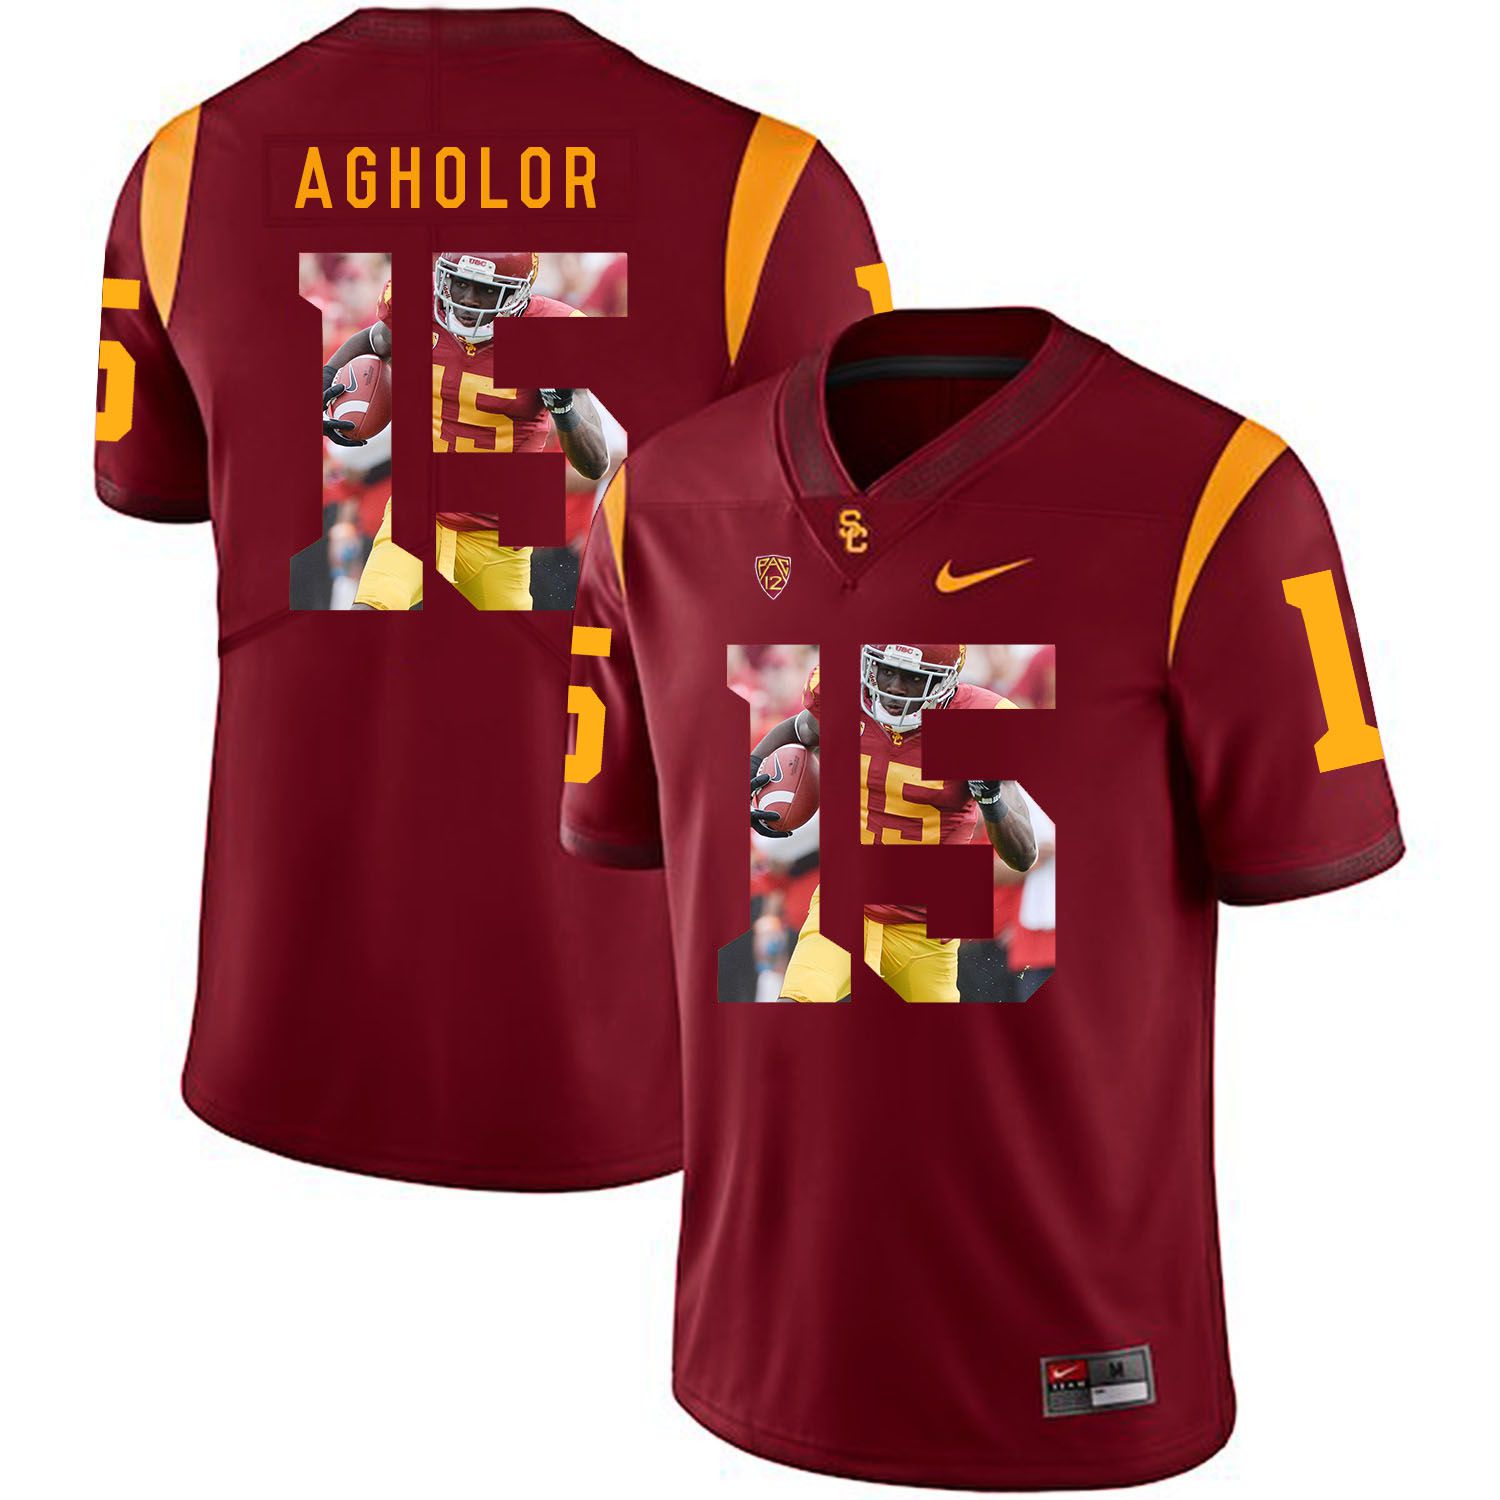 Men USC Trojans 15 Agholor Red Fashion Edition Customized NCAA Jerseys